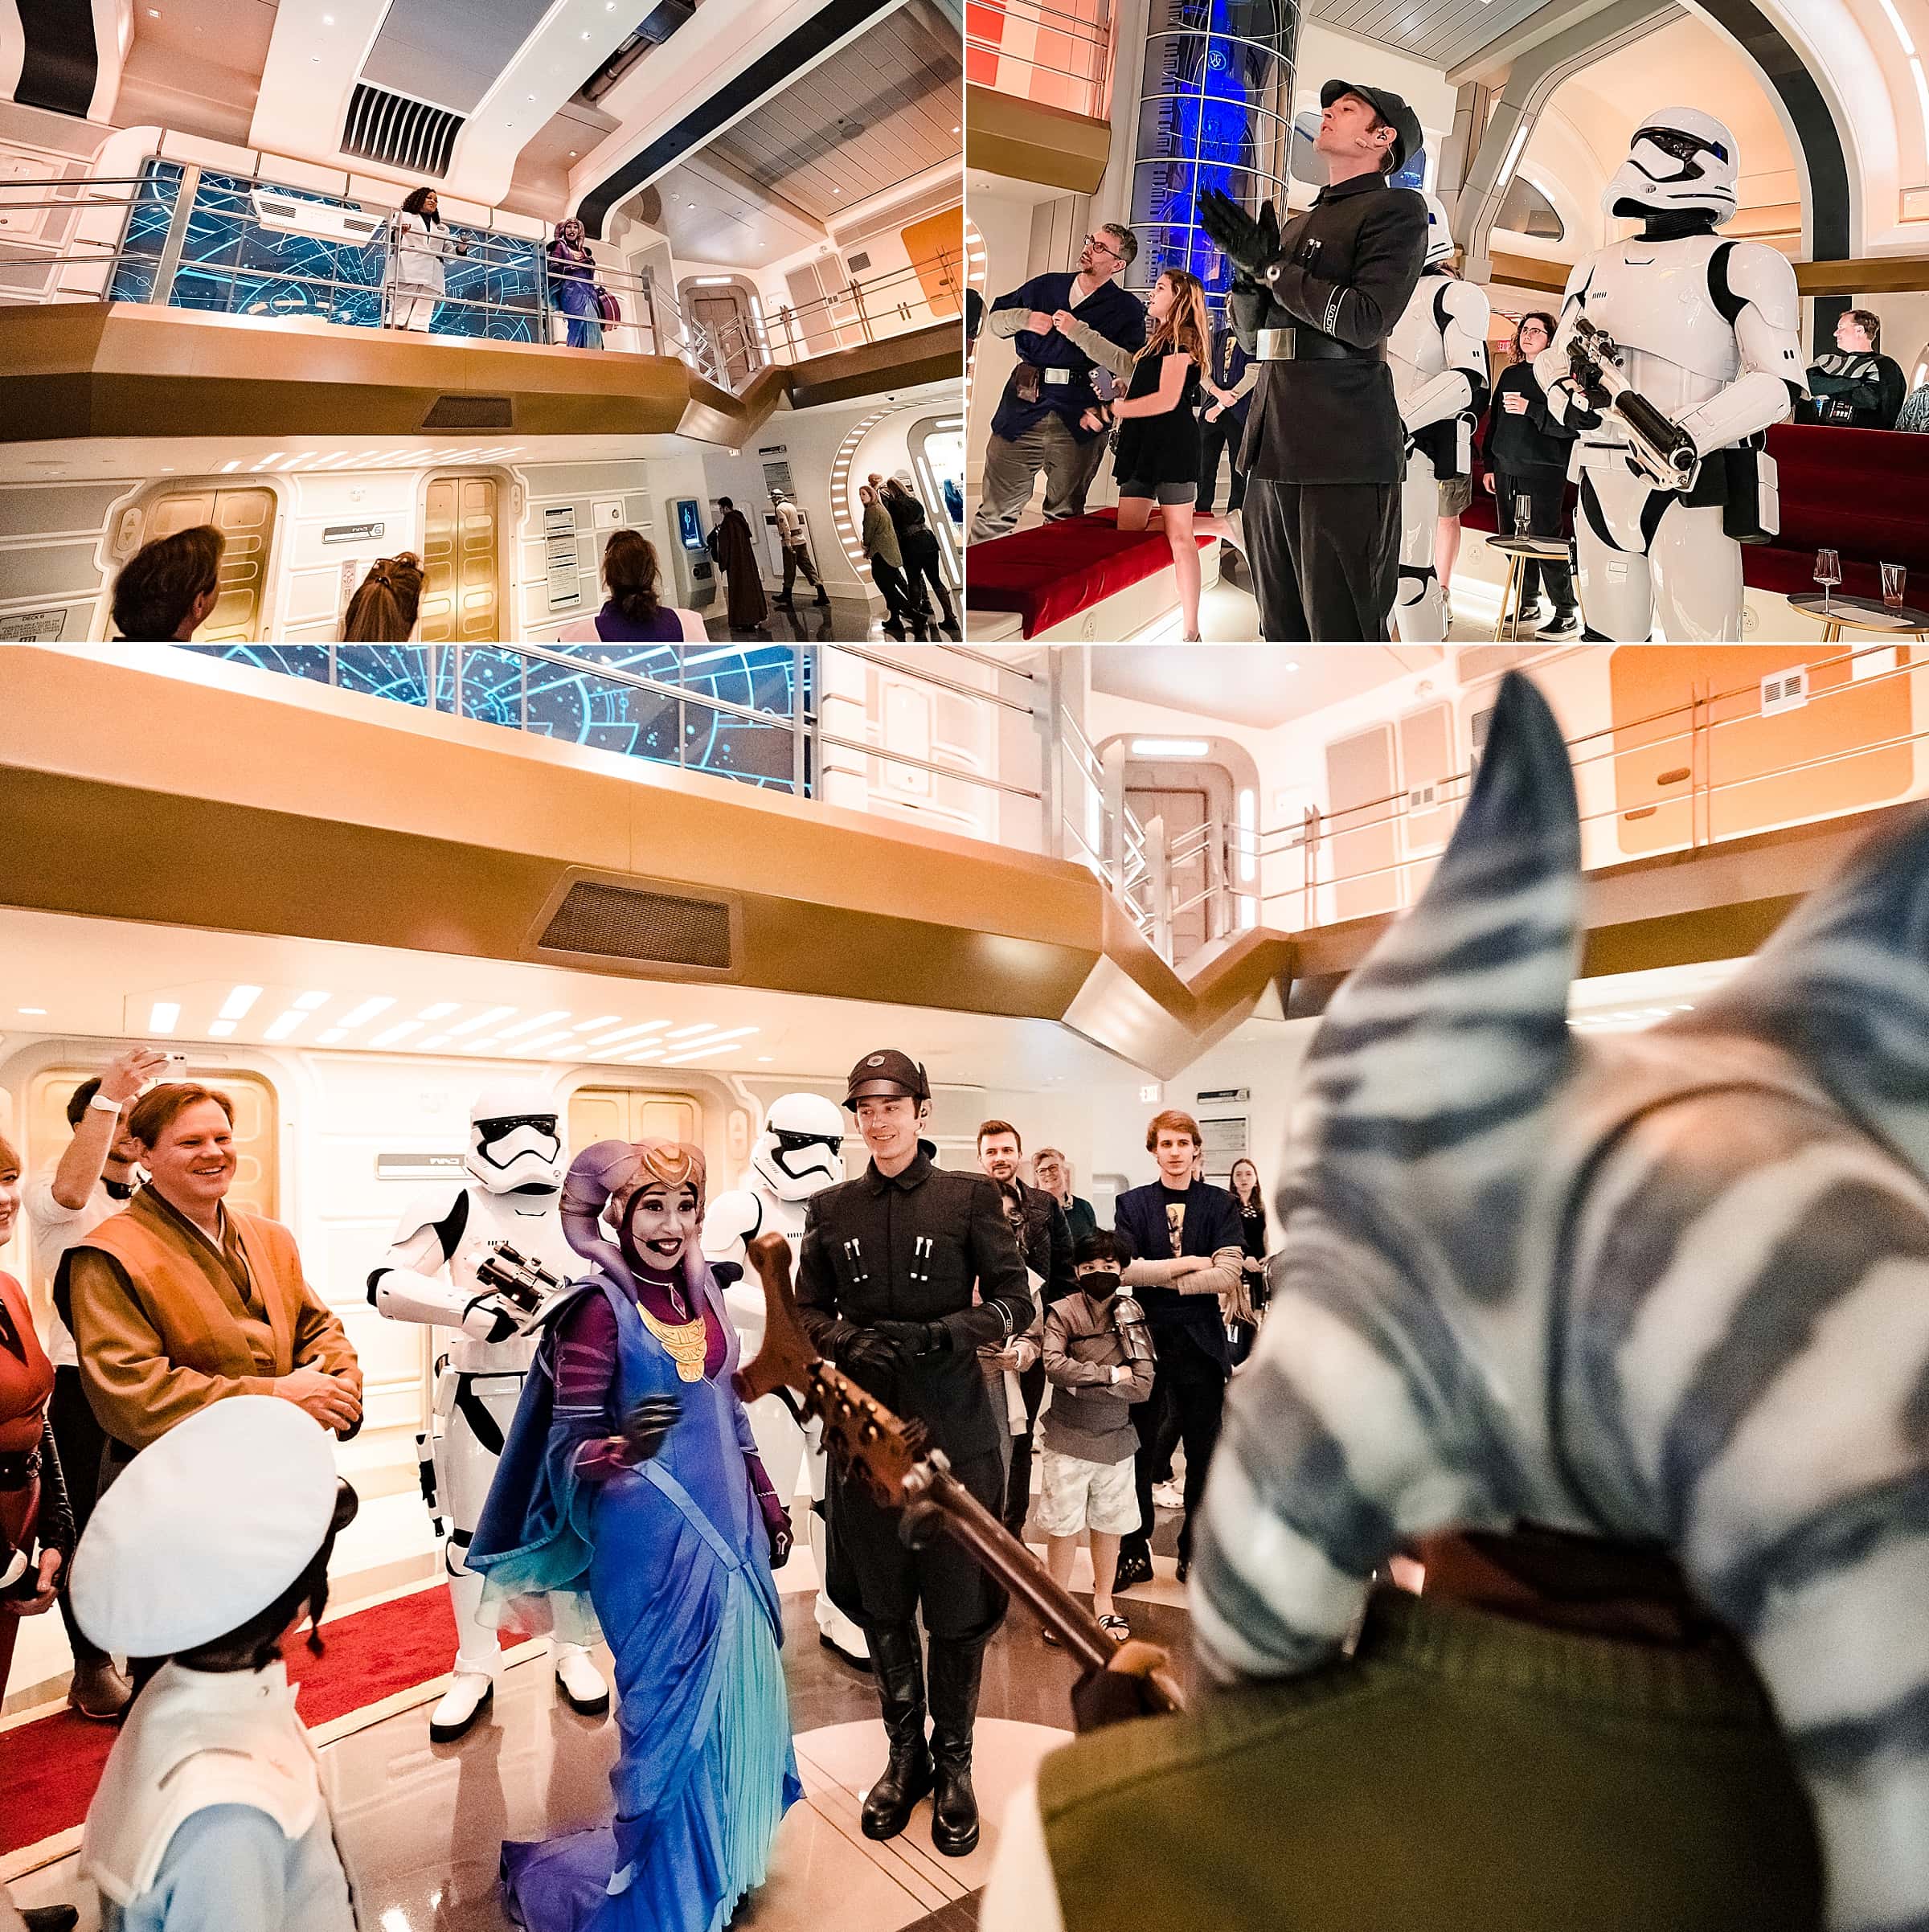 Having fun and meeting new friends on the Star Wars Galactic Starcruiser Halcyon